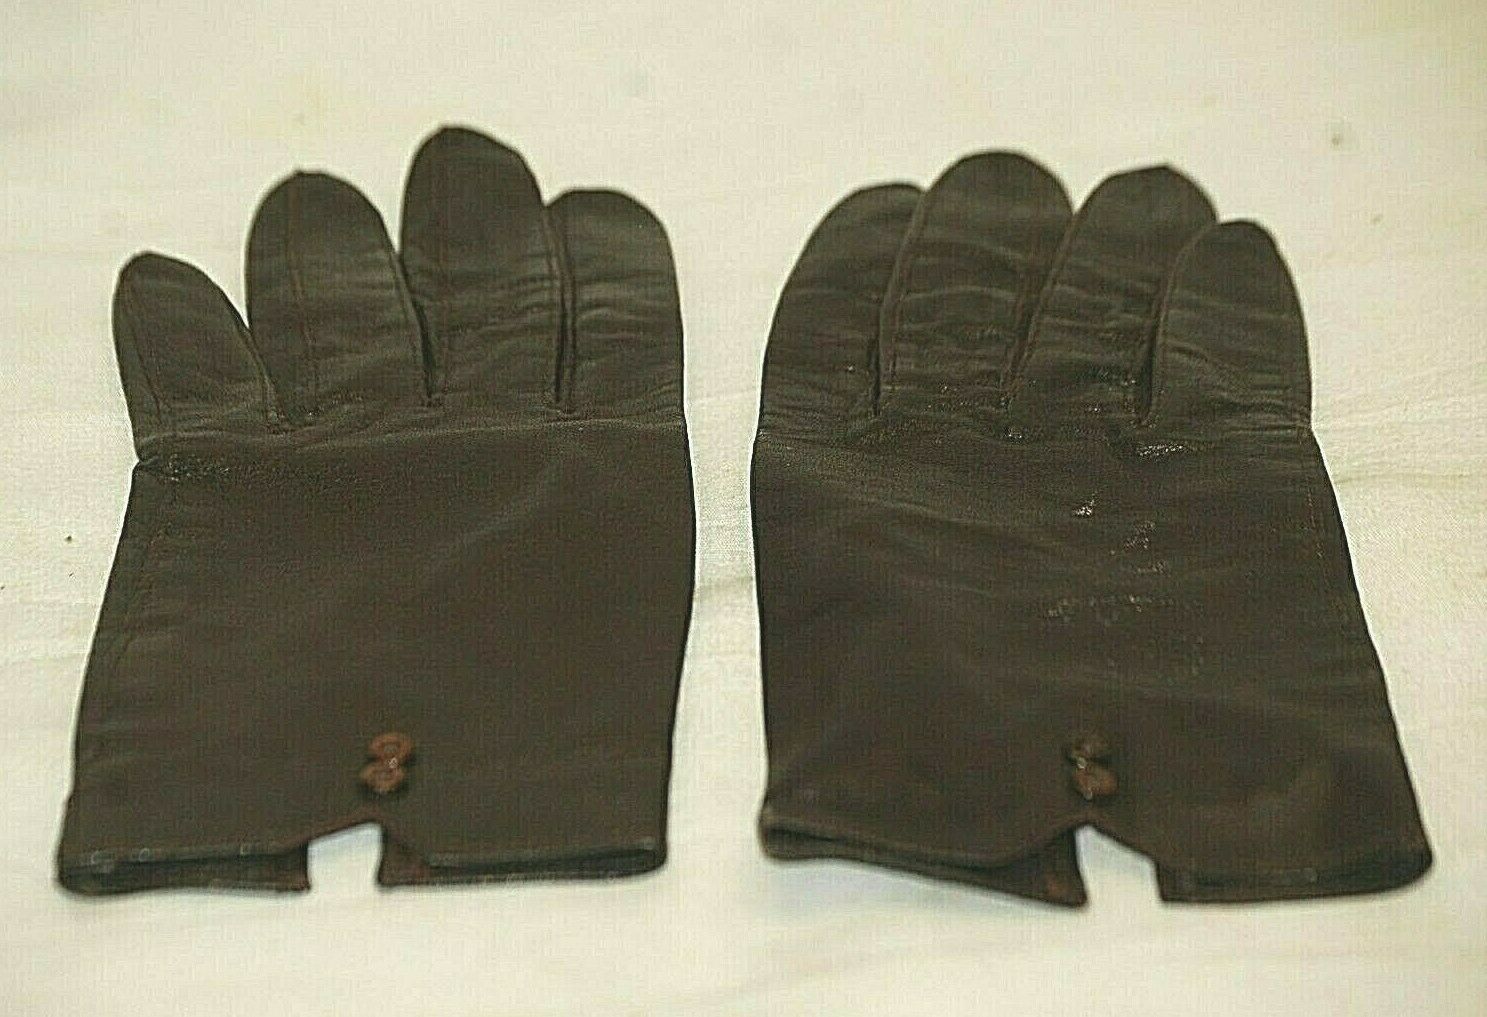 Genuine Leather Gloves 100% Rayon Tricot Lined Winter Gloves Size M Japan